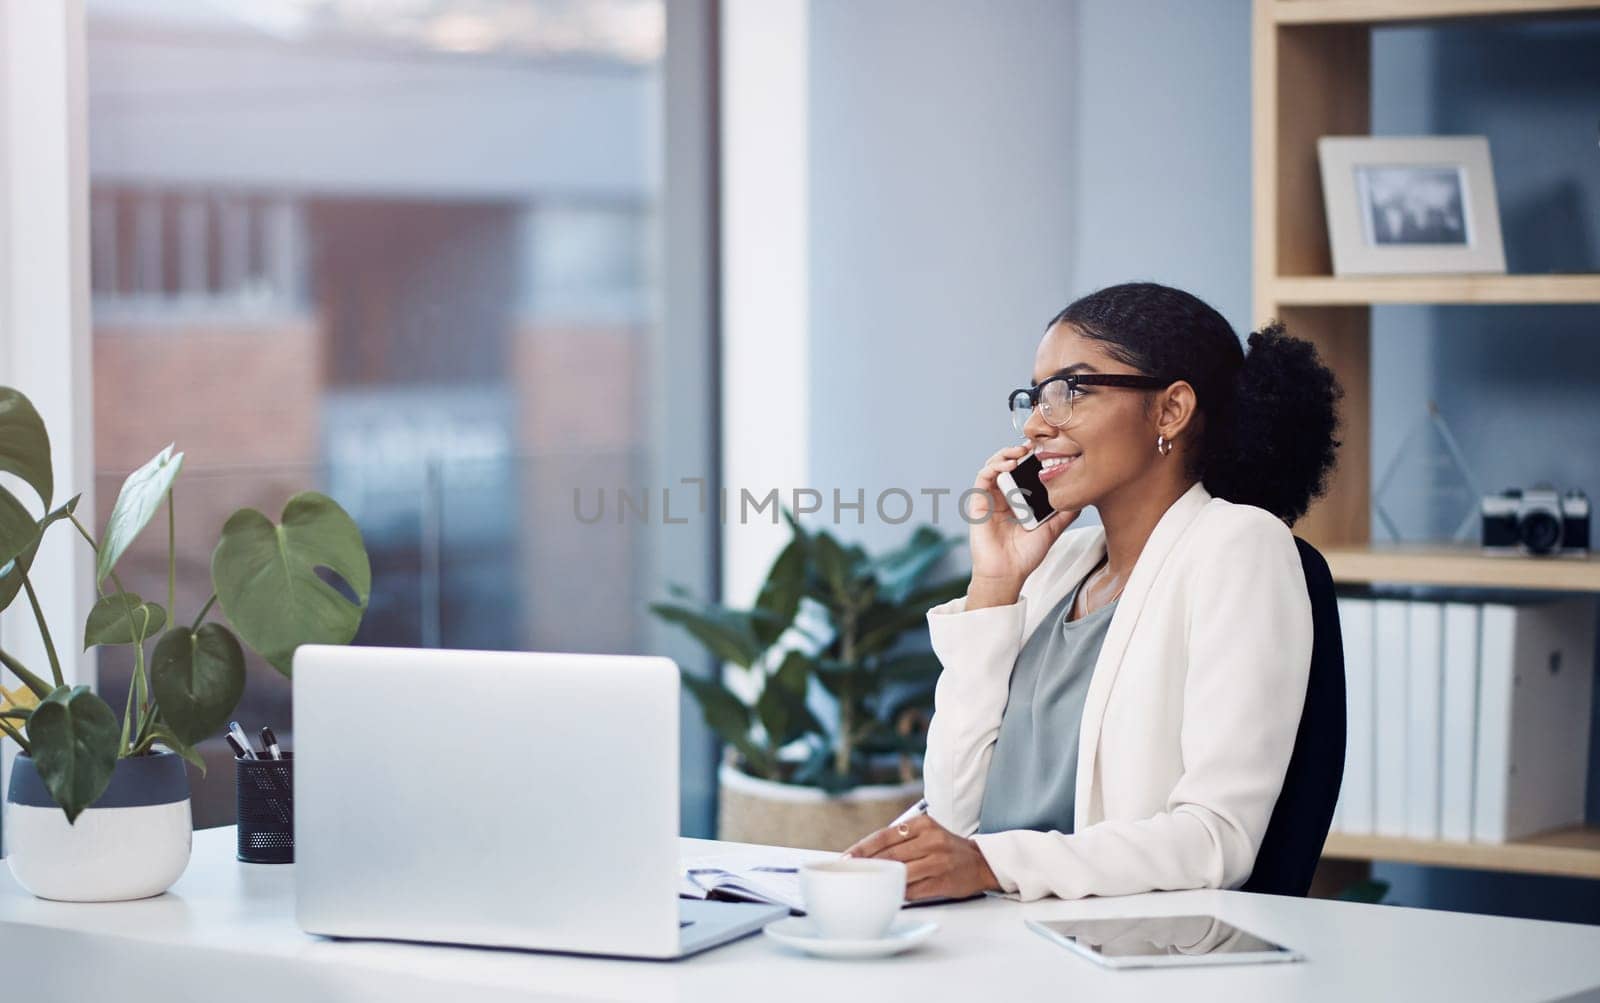 Phone call, laptop and black woman in office for online talking, networking and discussion. Corporate worker, consulting and person on smartphone and computer for planning, contact or communication.